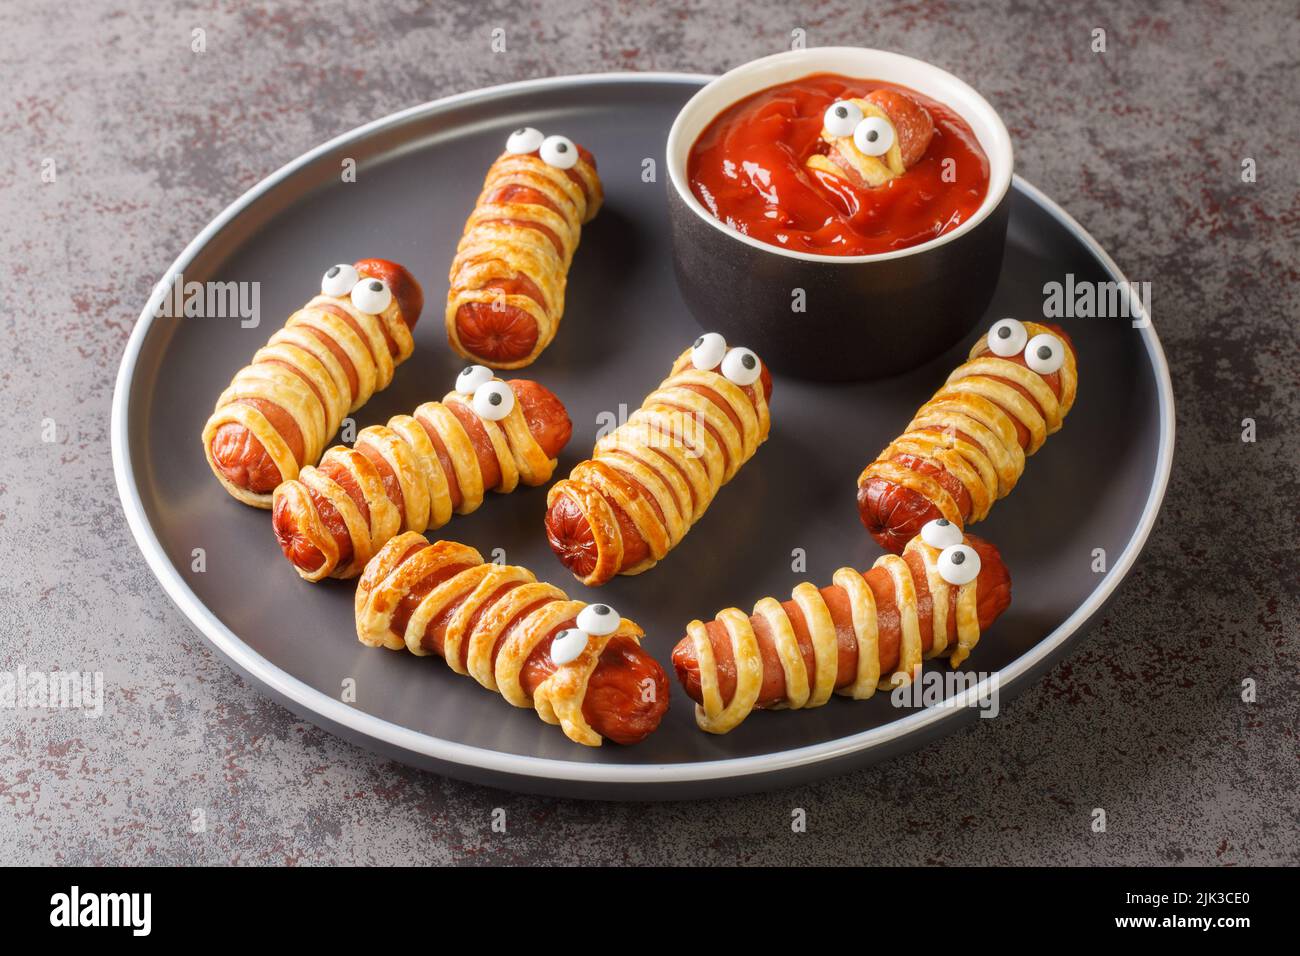 Funny sausage mummies in dough with ketchup for the Halloween party. Children's food closeup in the plate on the table. Horizontal Stock Photo